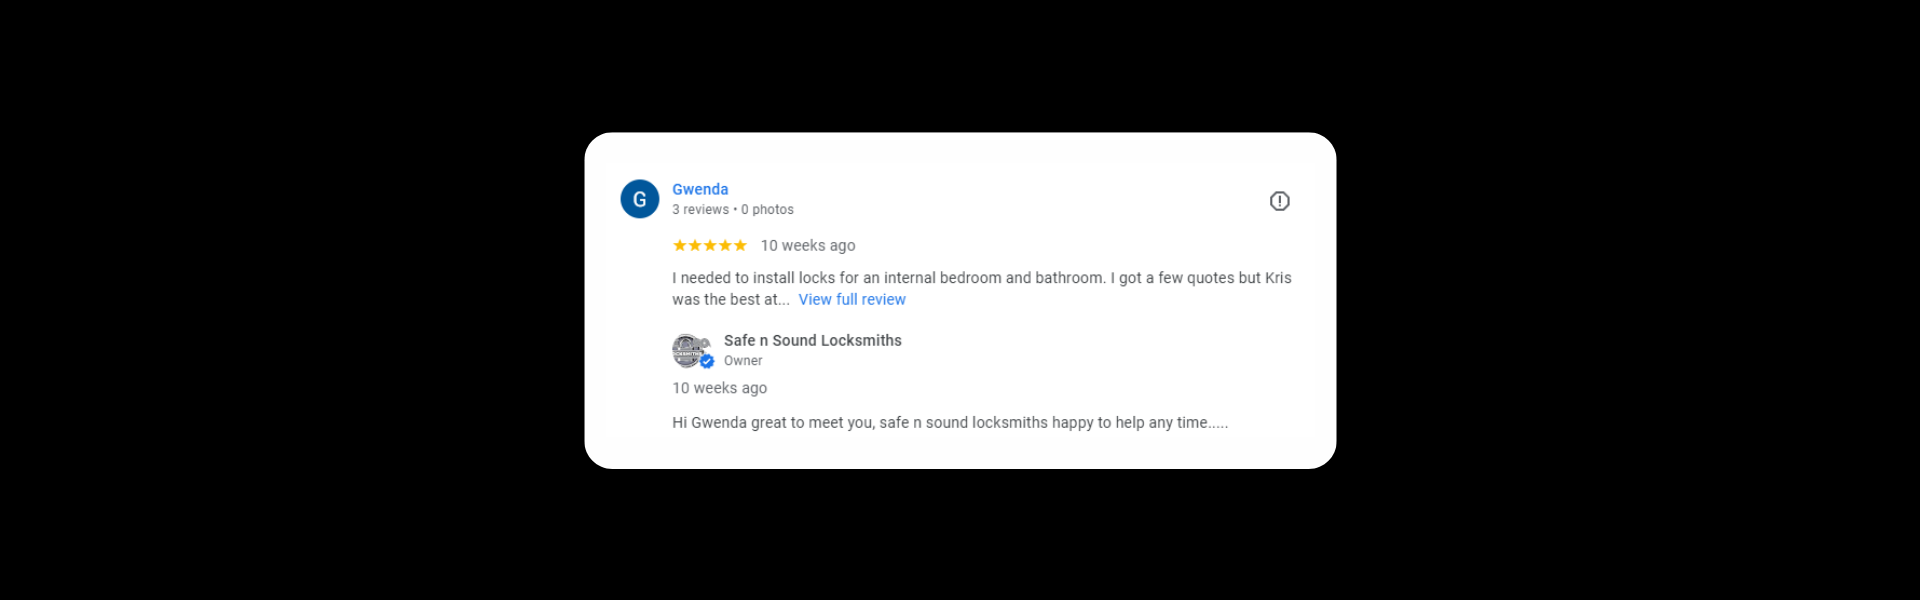 Gwenda 3 reviews 2 months ago I needed to install locks for an internal bedroom and bathroom. I got a few quotes but Kris was the best at communication so I chose him (similar price anyway).… Response from the owner2 months ago Hi Gwenda great to meet you, safe n sound locksmiths happy to help any time.....